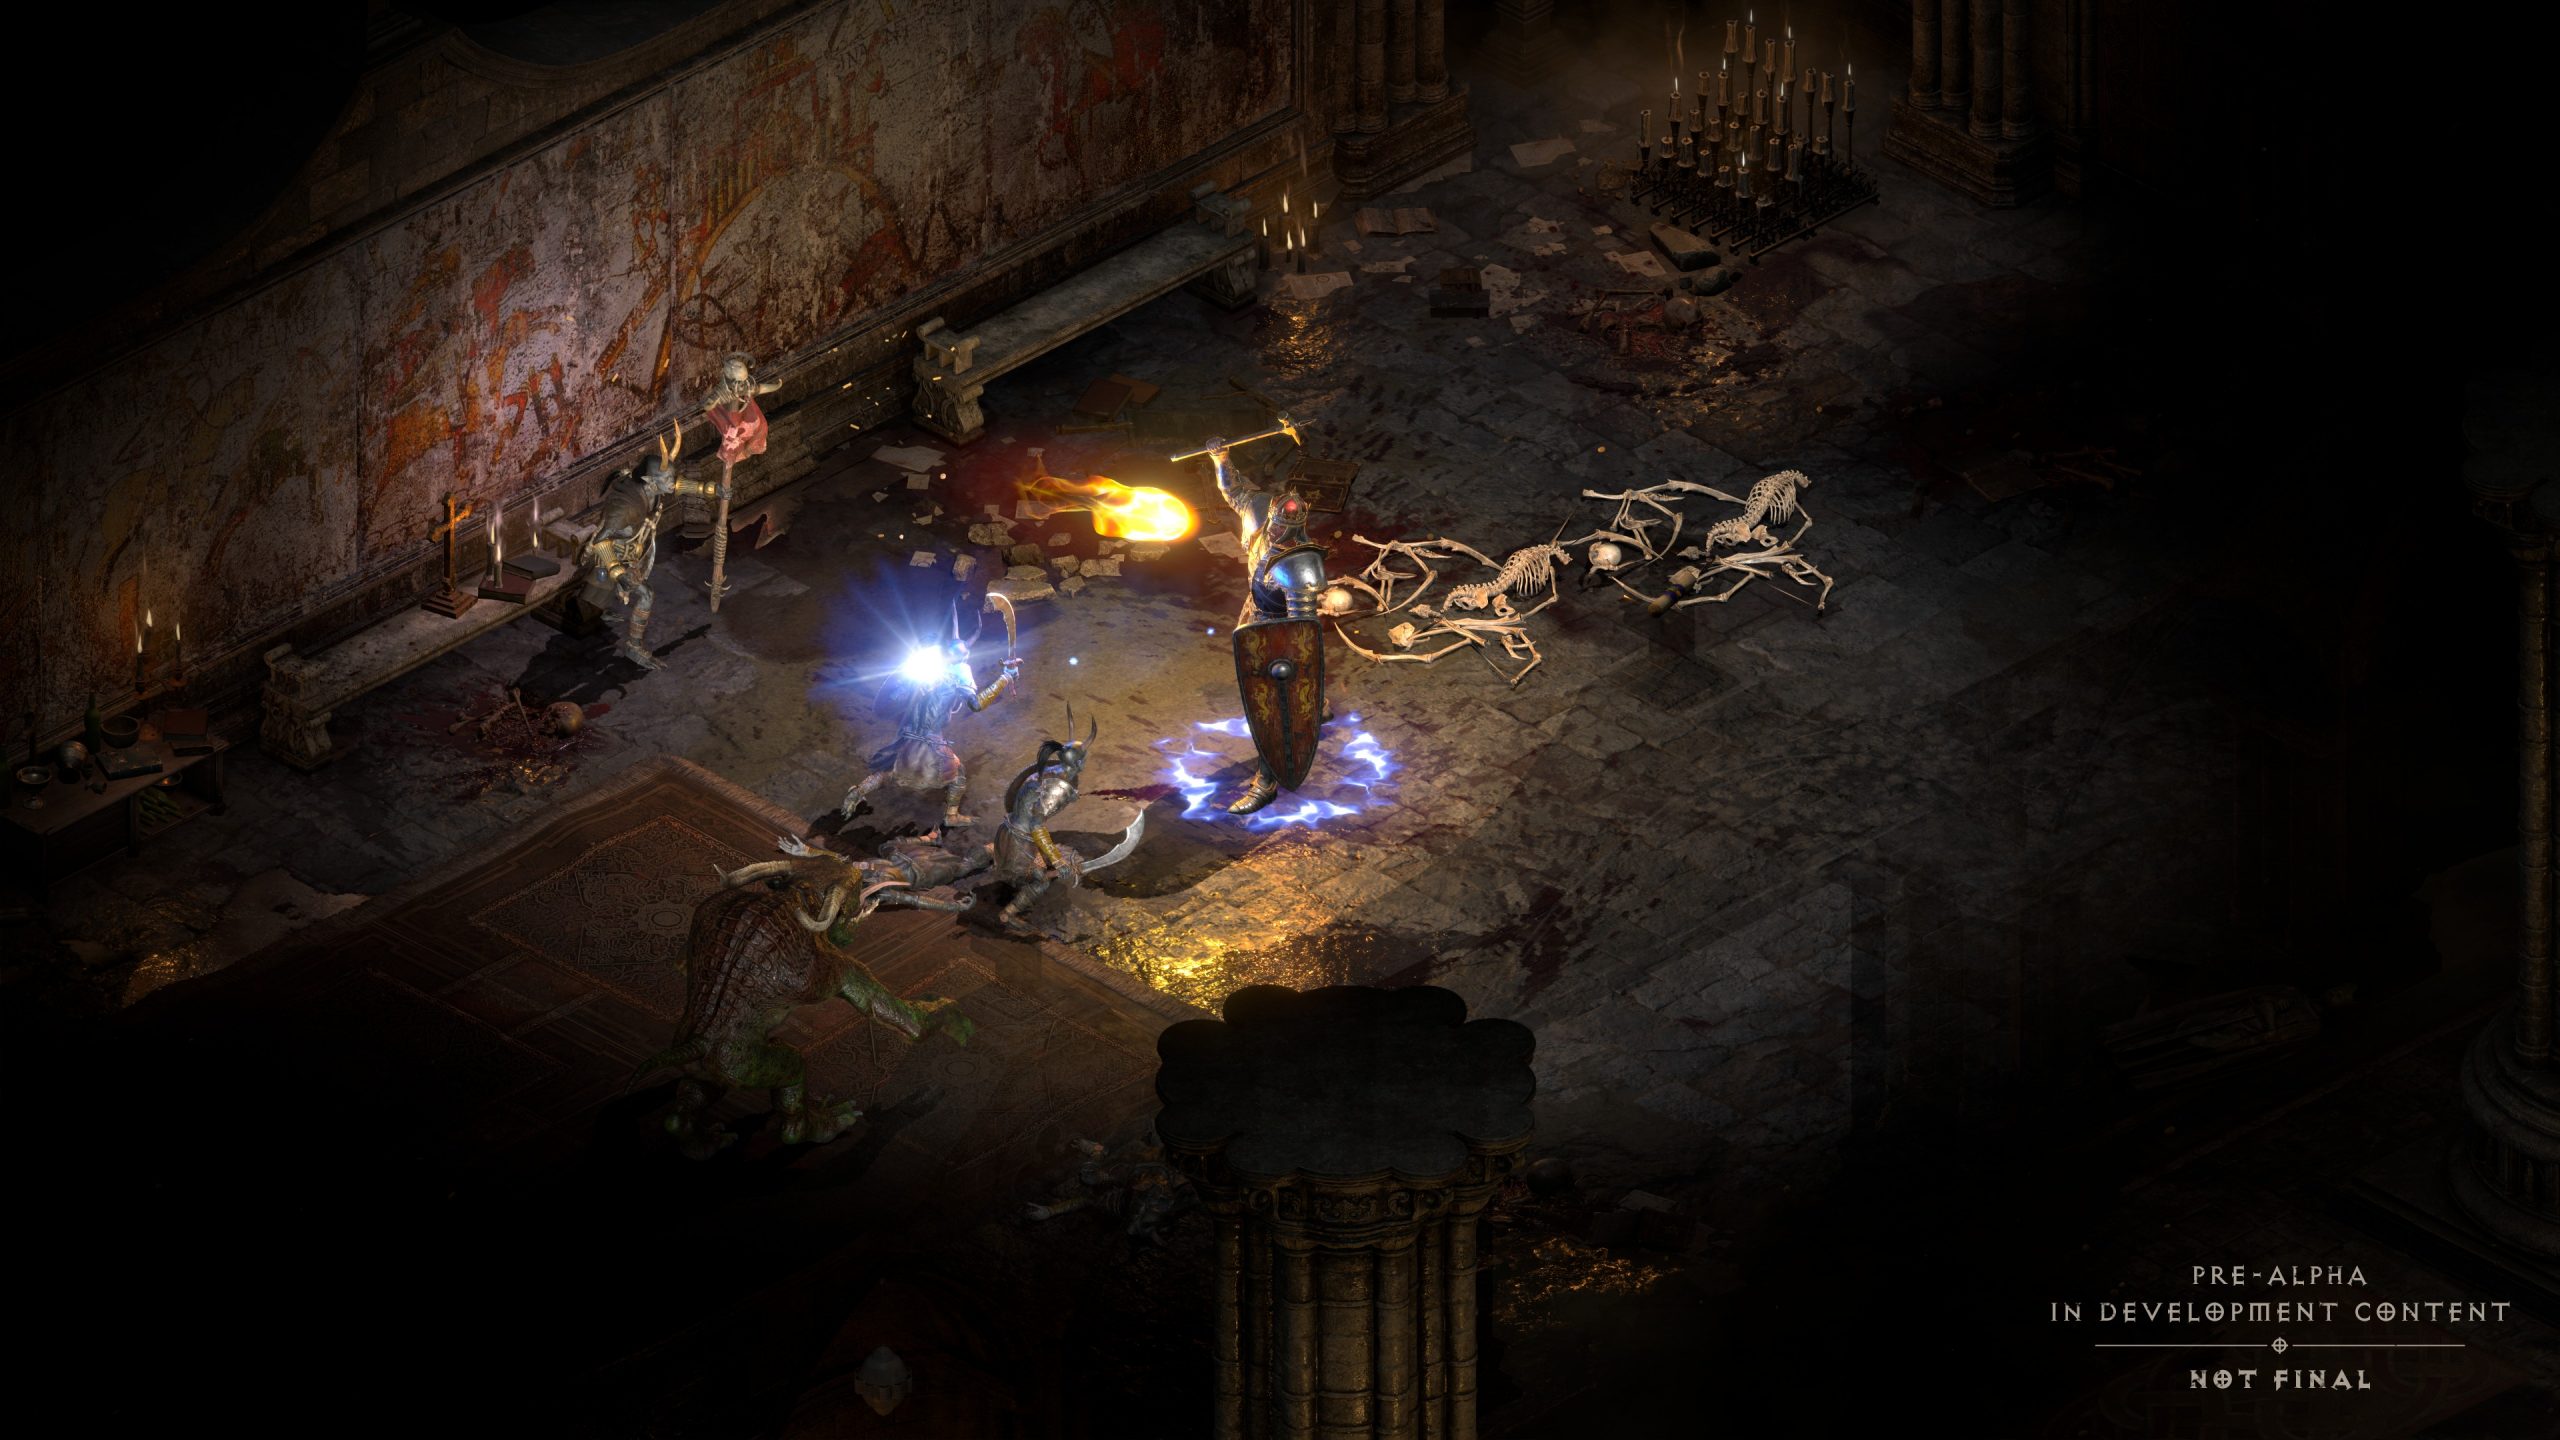 diablo 2 resurrected switch physical release